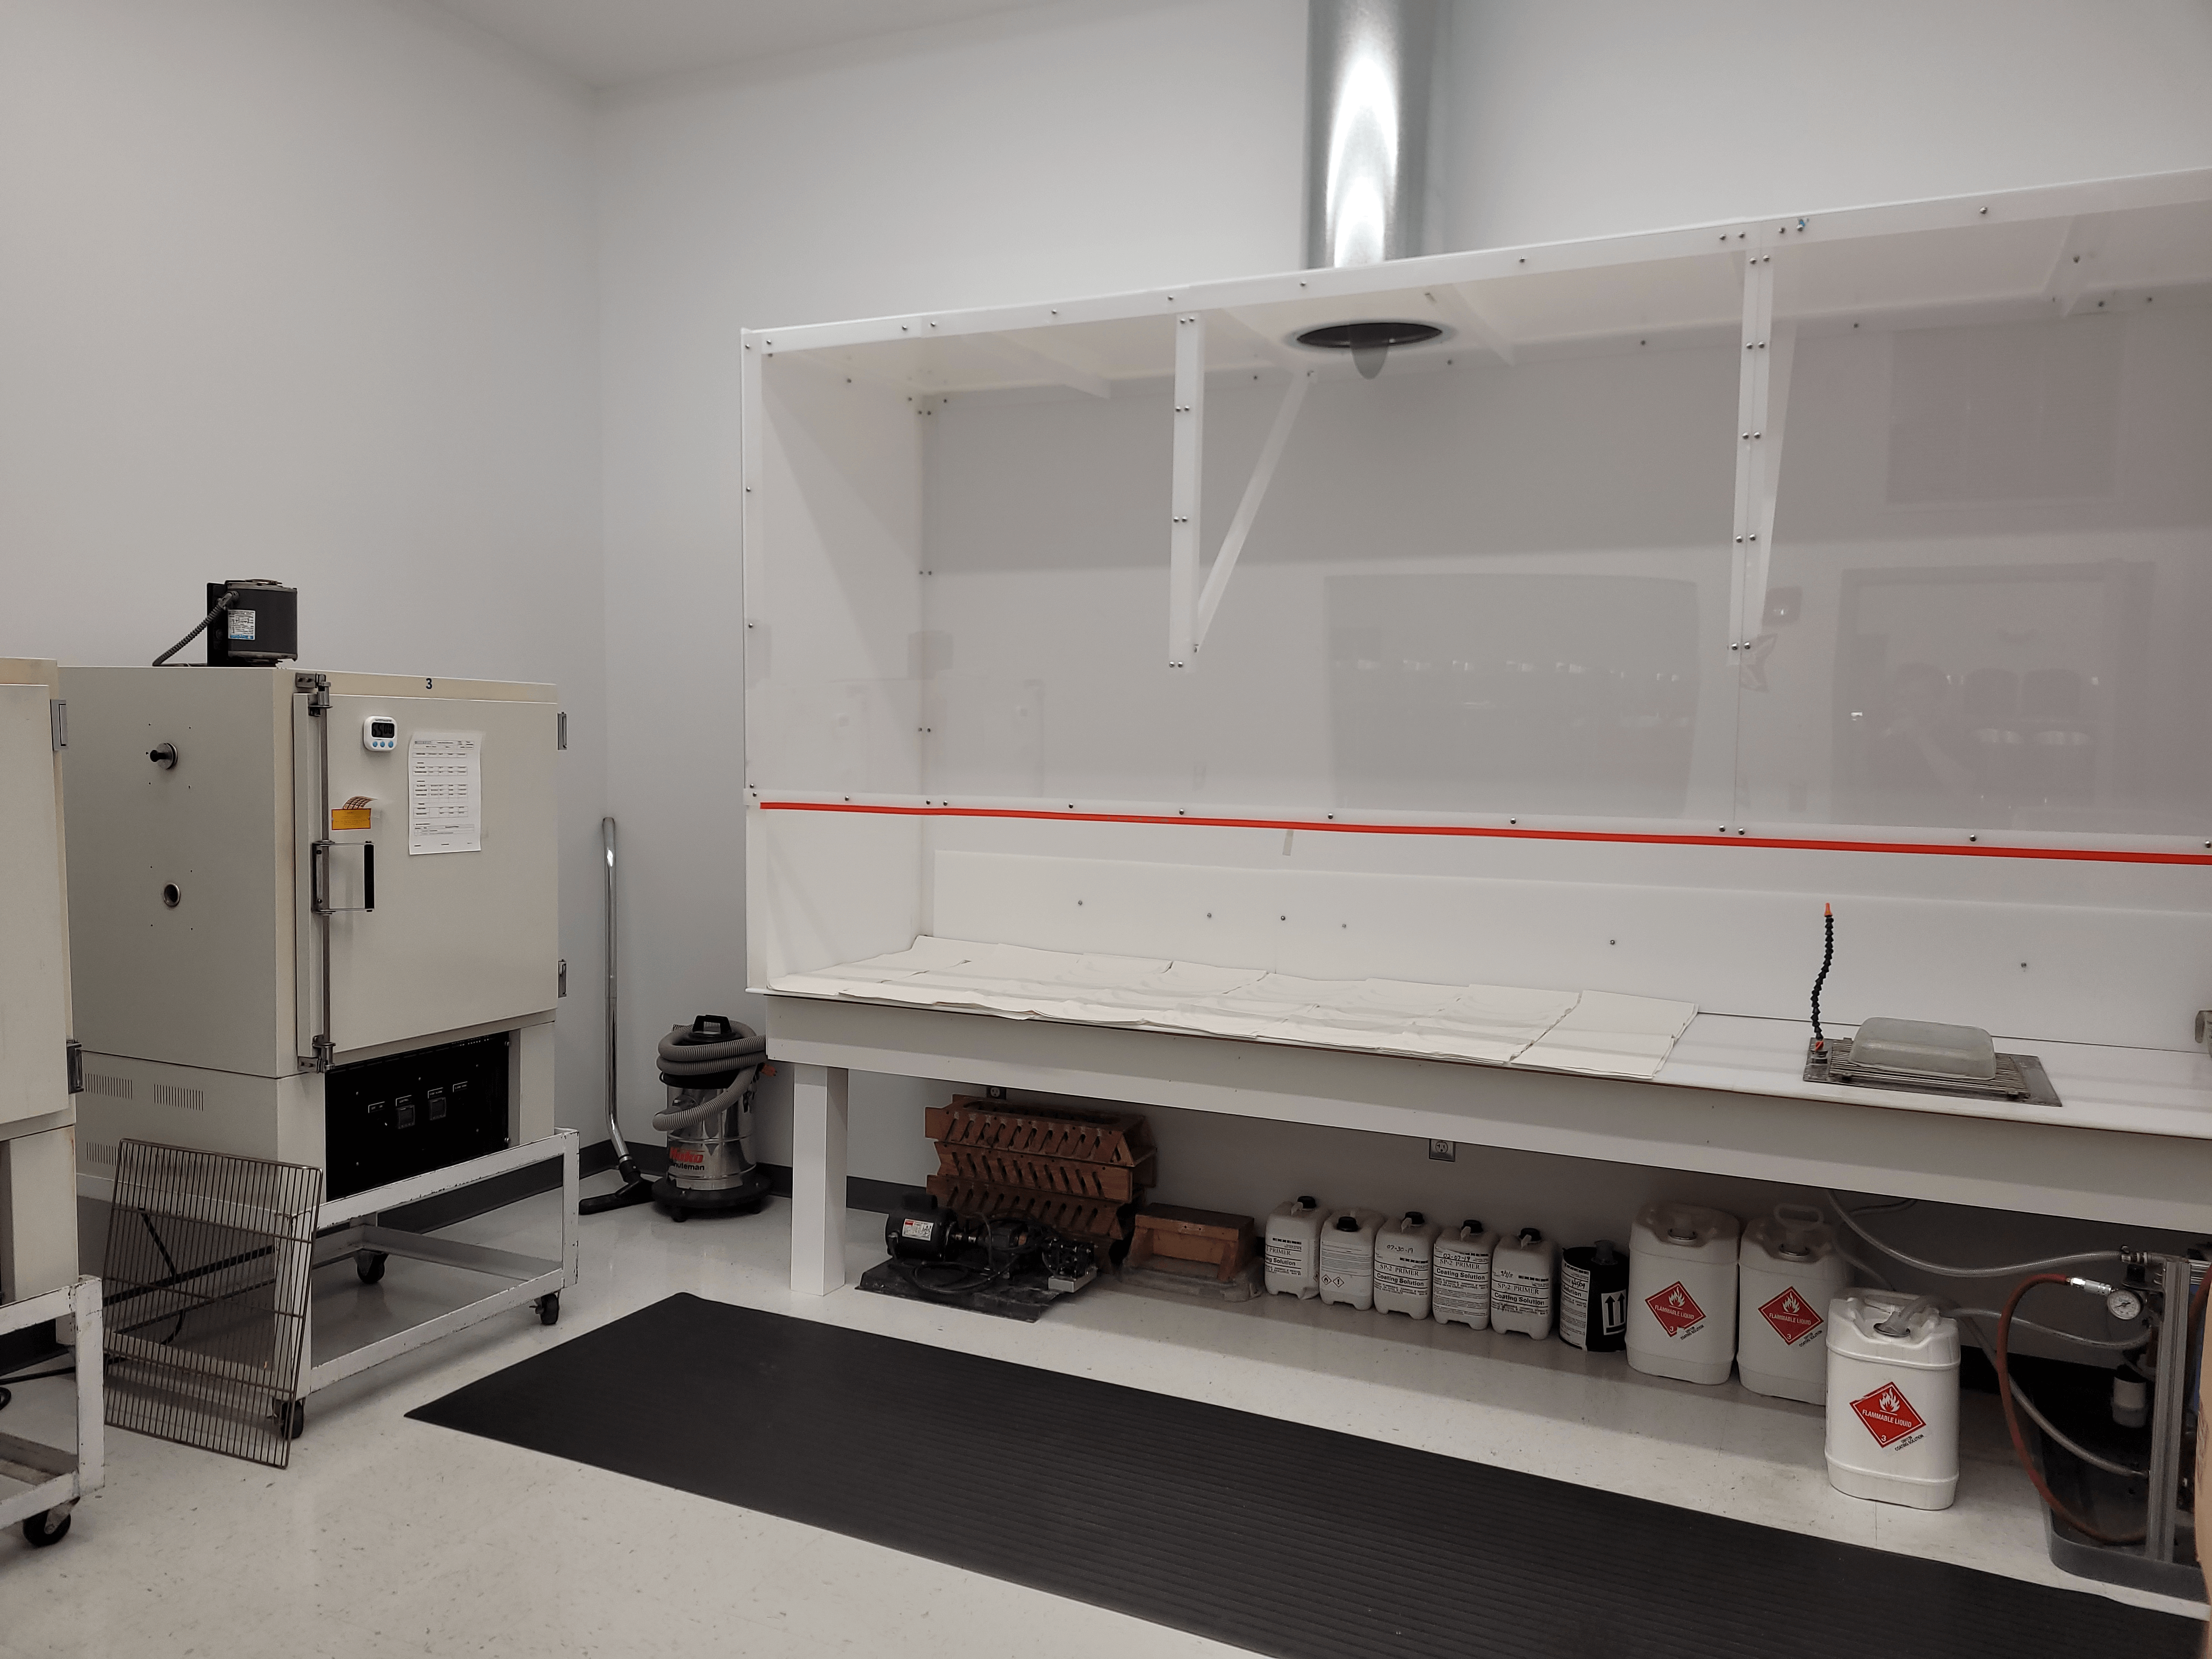 Coating Room with ovens, drying area, and sink.